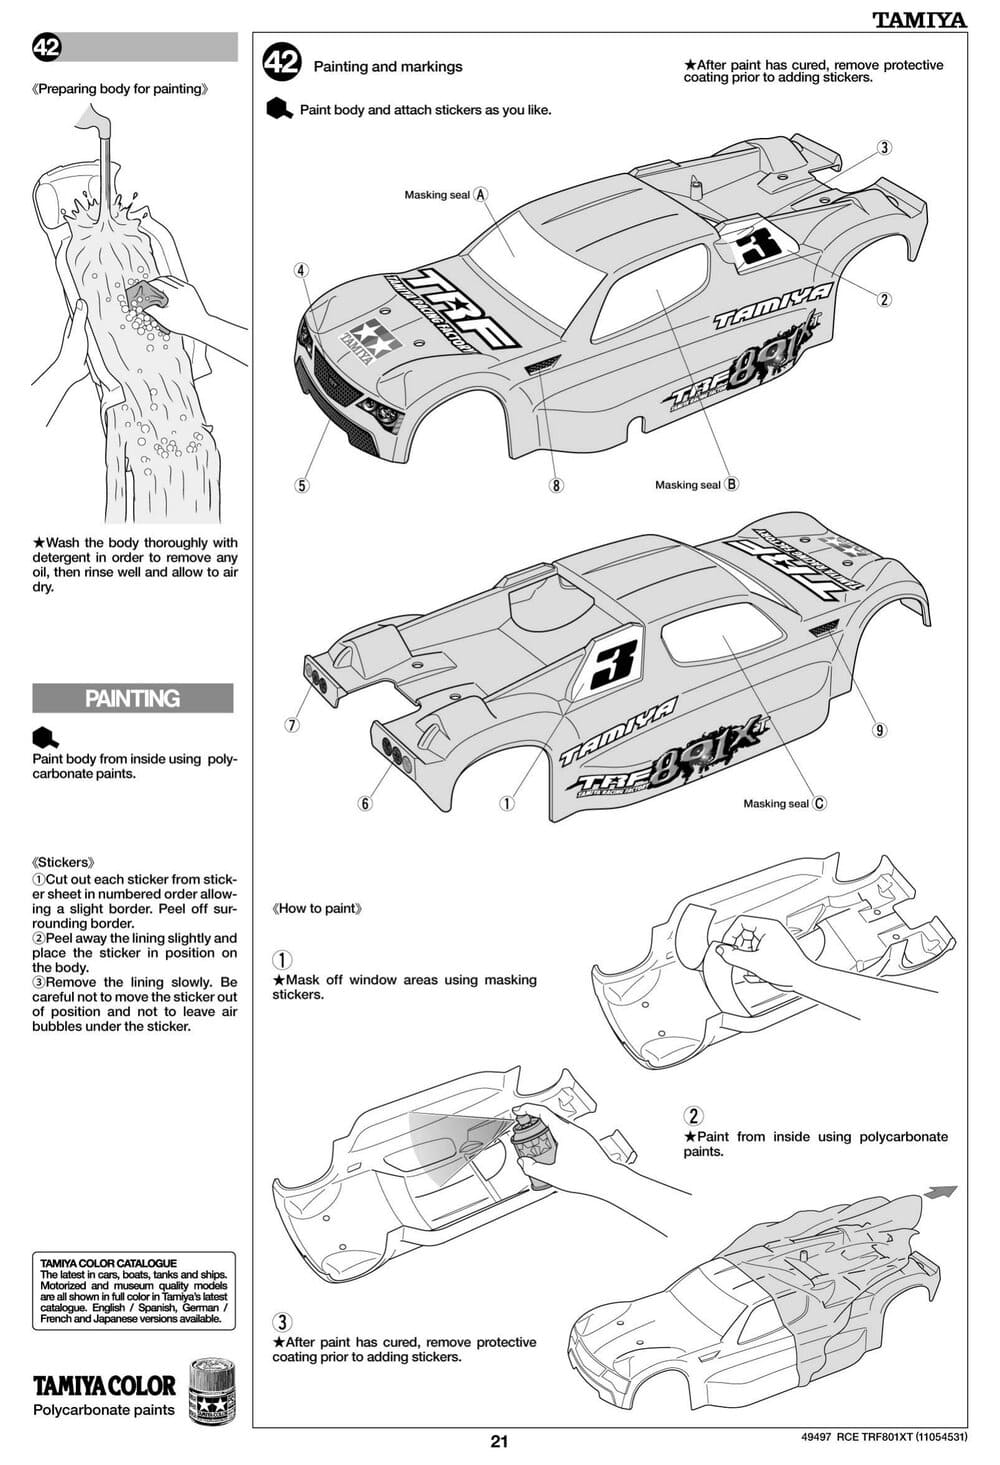 Tamiya - TRF801Xt Performance Package Version Chassis - Manual - Page 21